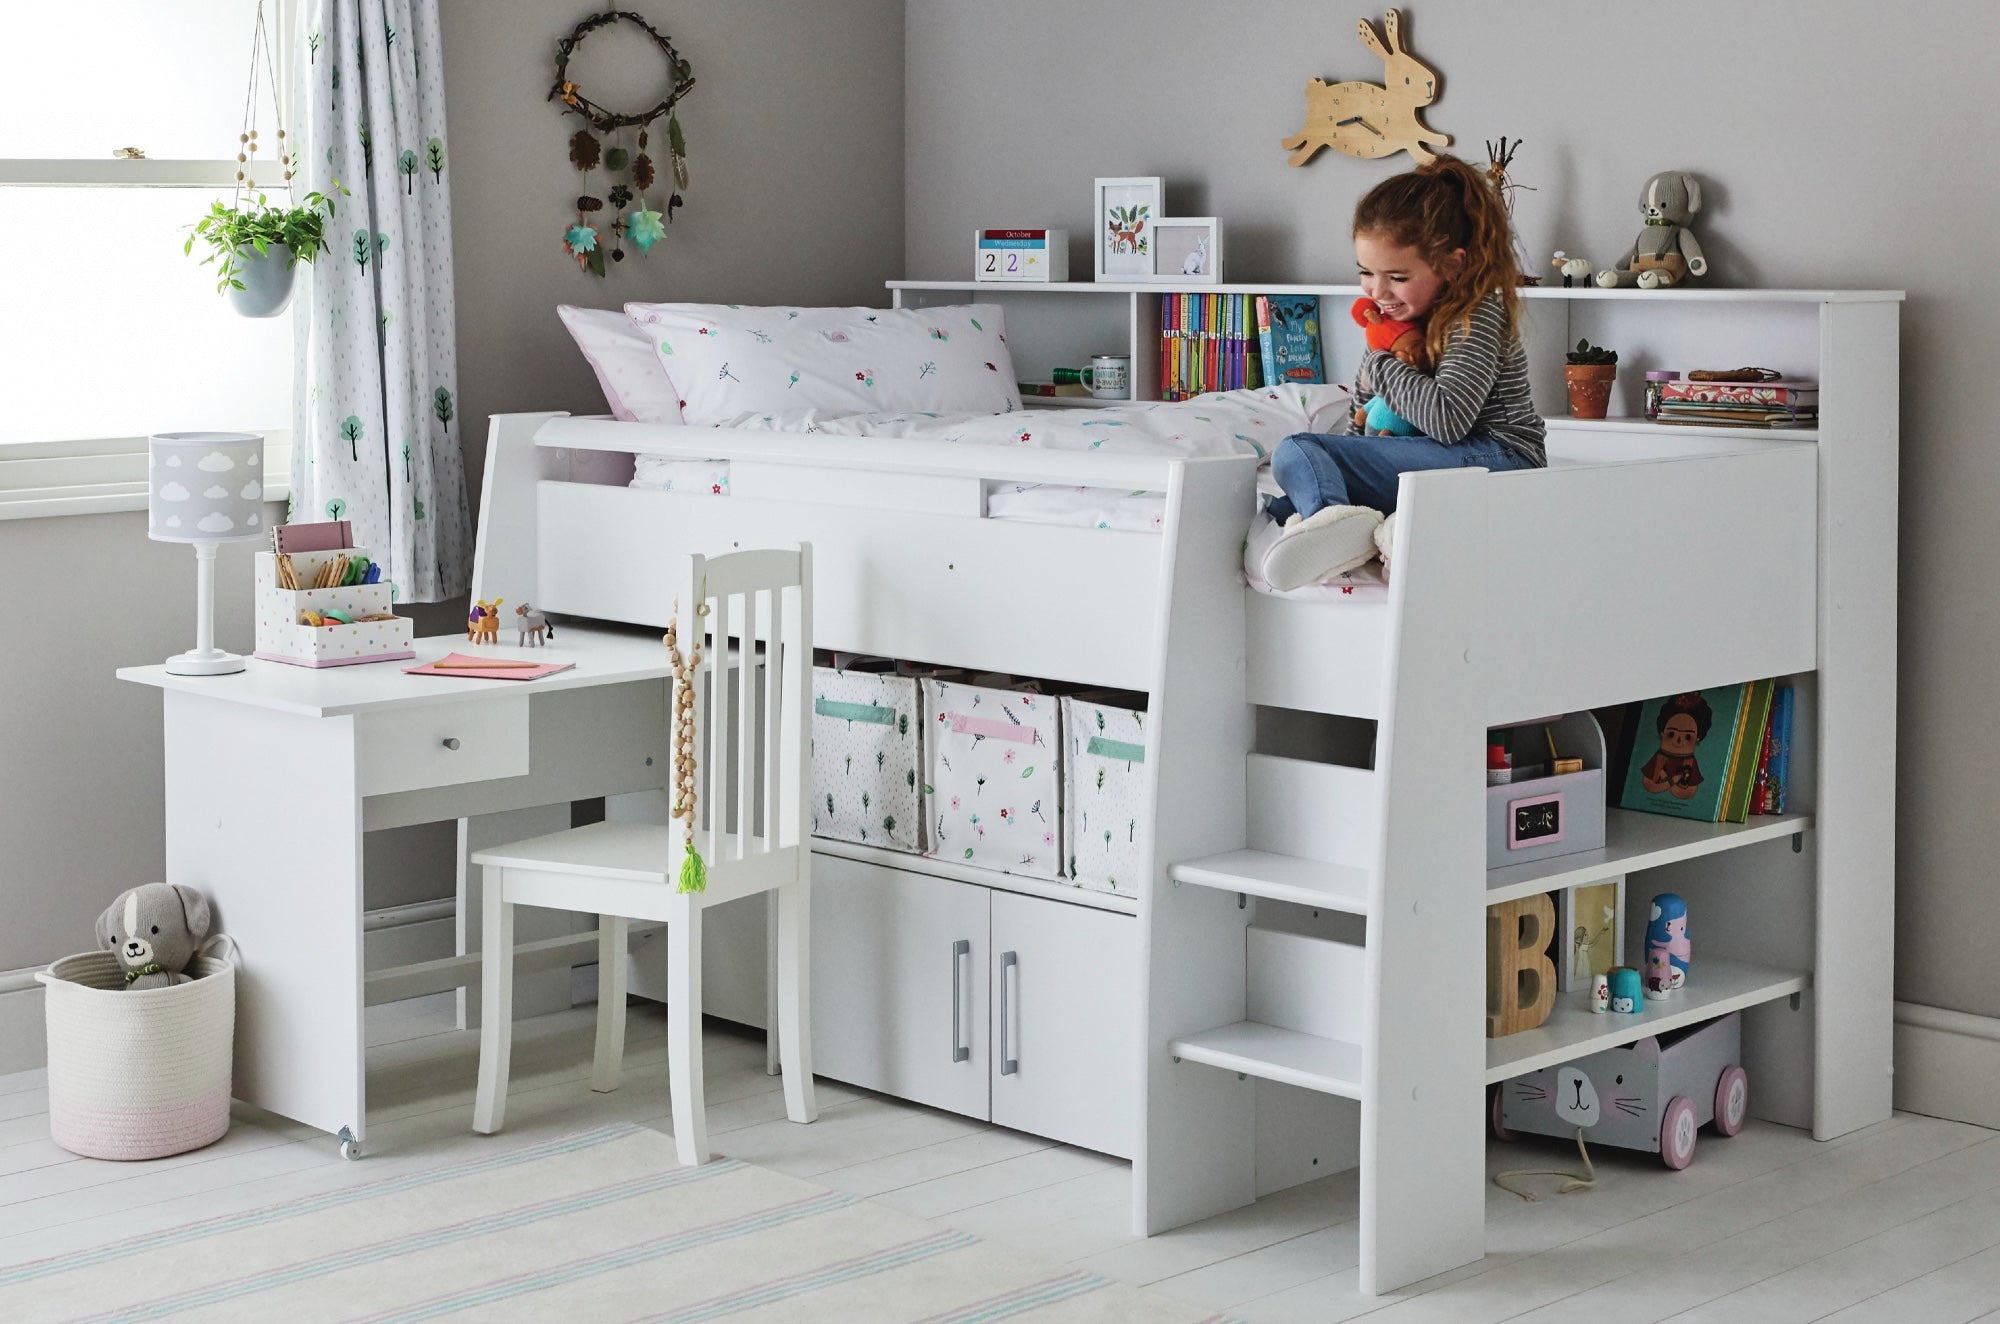 A guide to GLTC's children's beds range